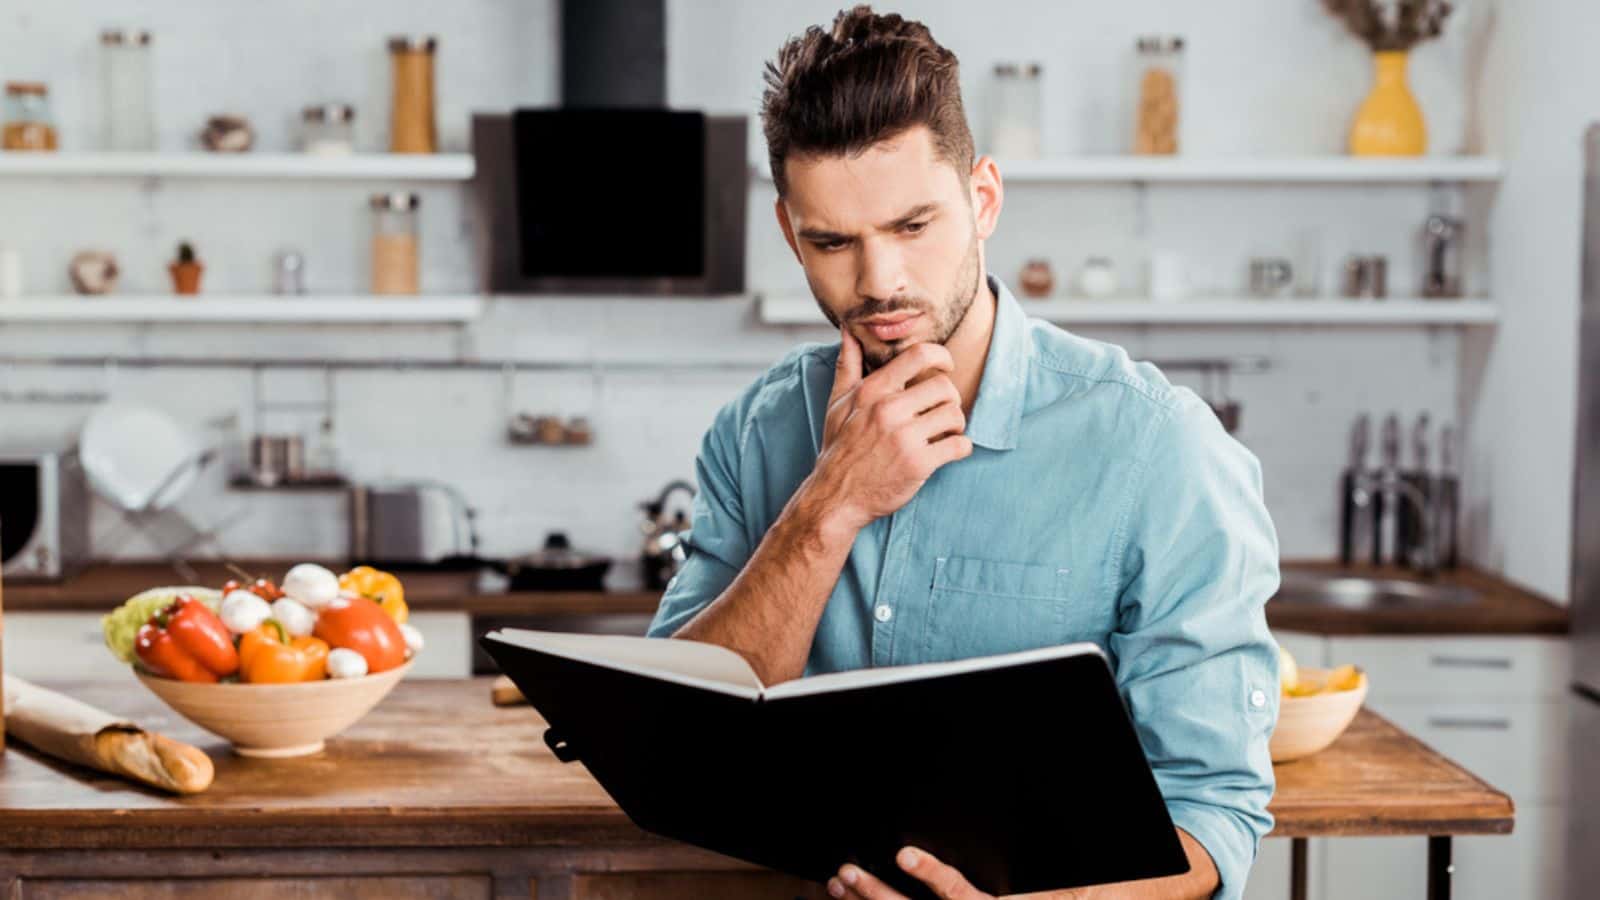 Thoughtful handsome young man reading cookbook